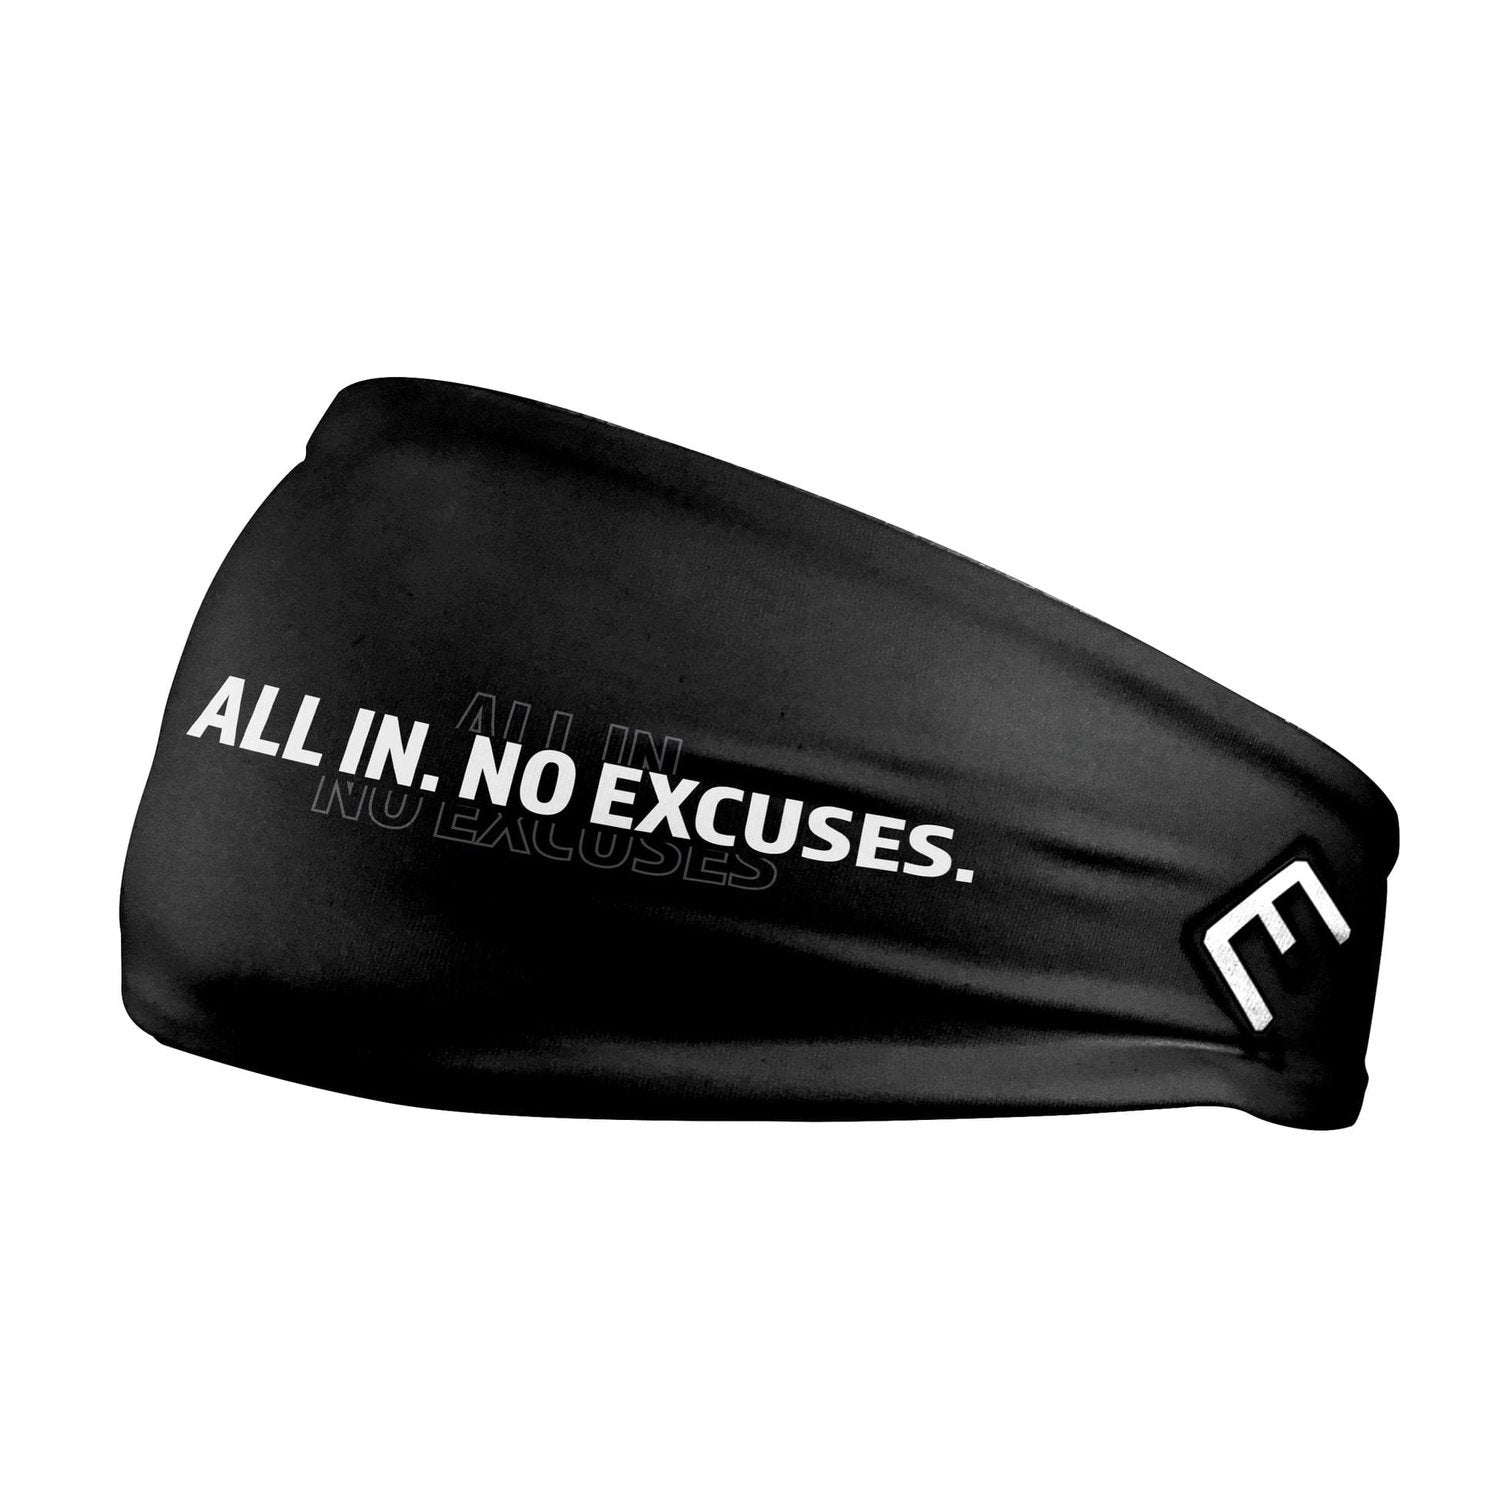 Elite Athletic Gear All In. No Excuses. Headband kaufen bei HighPowered.ch